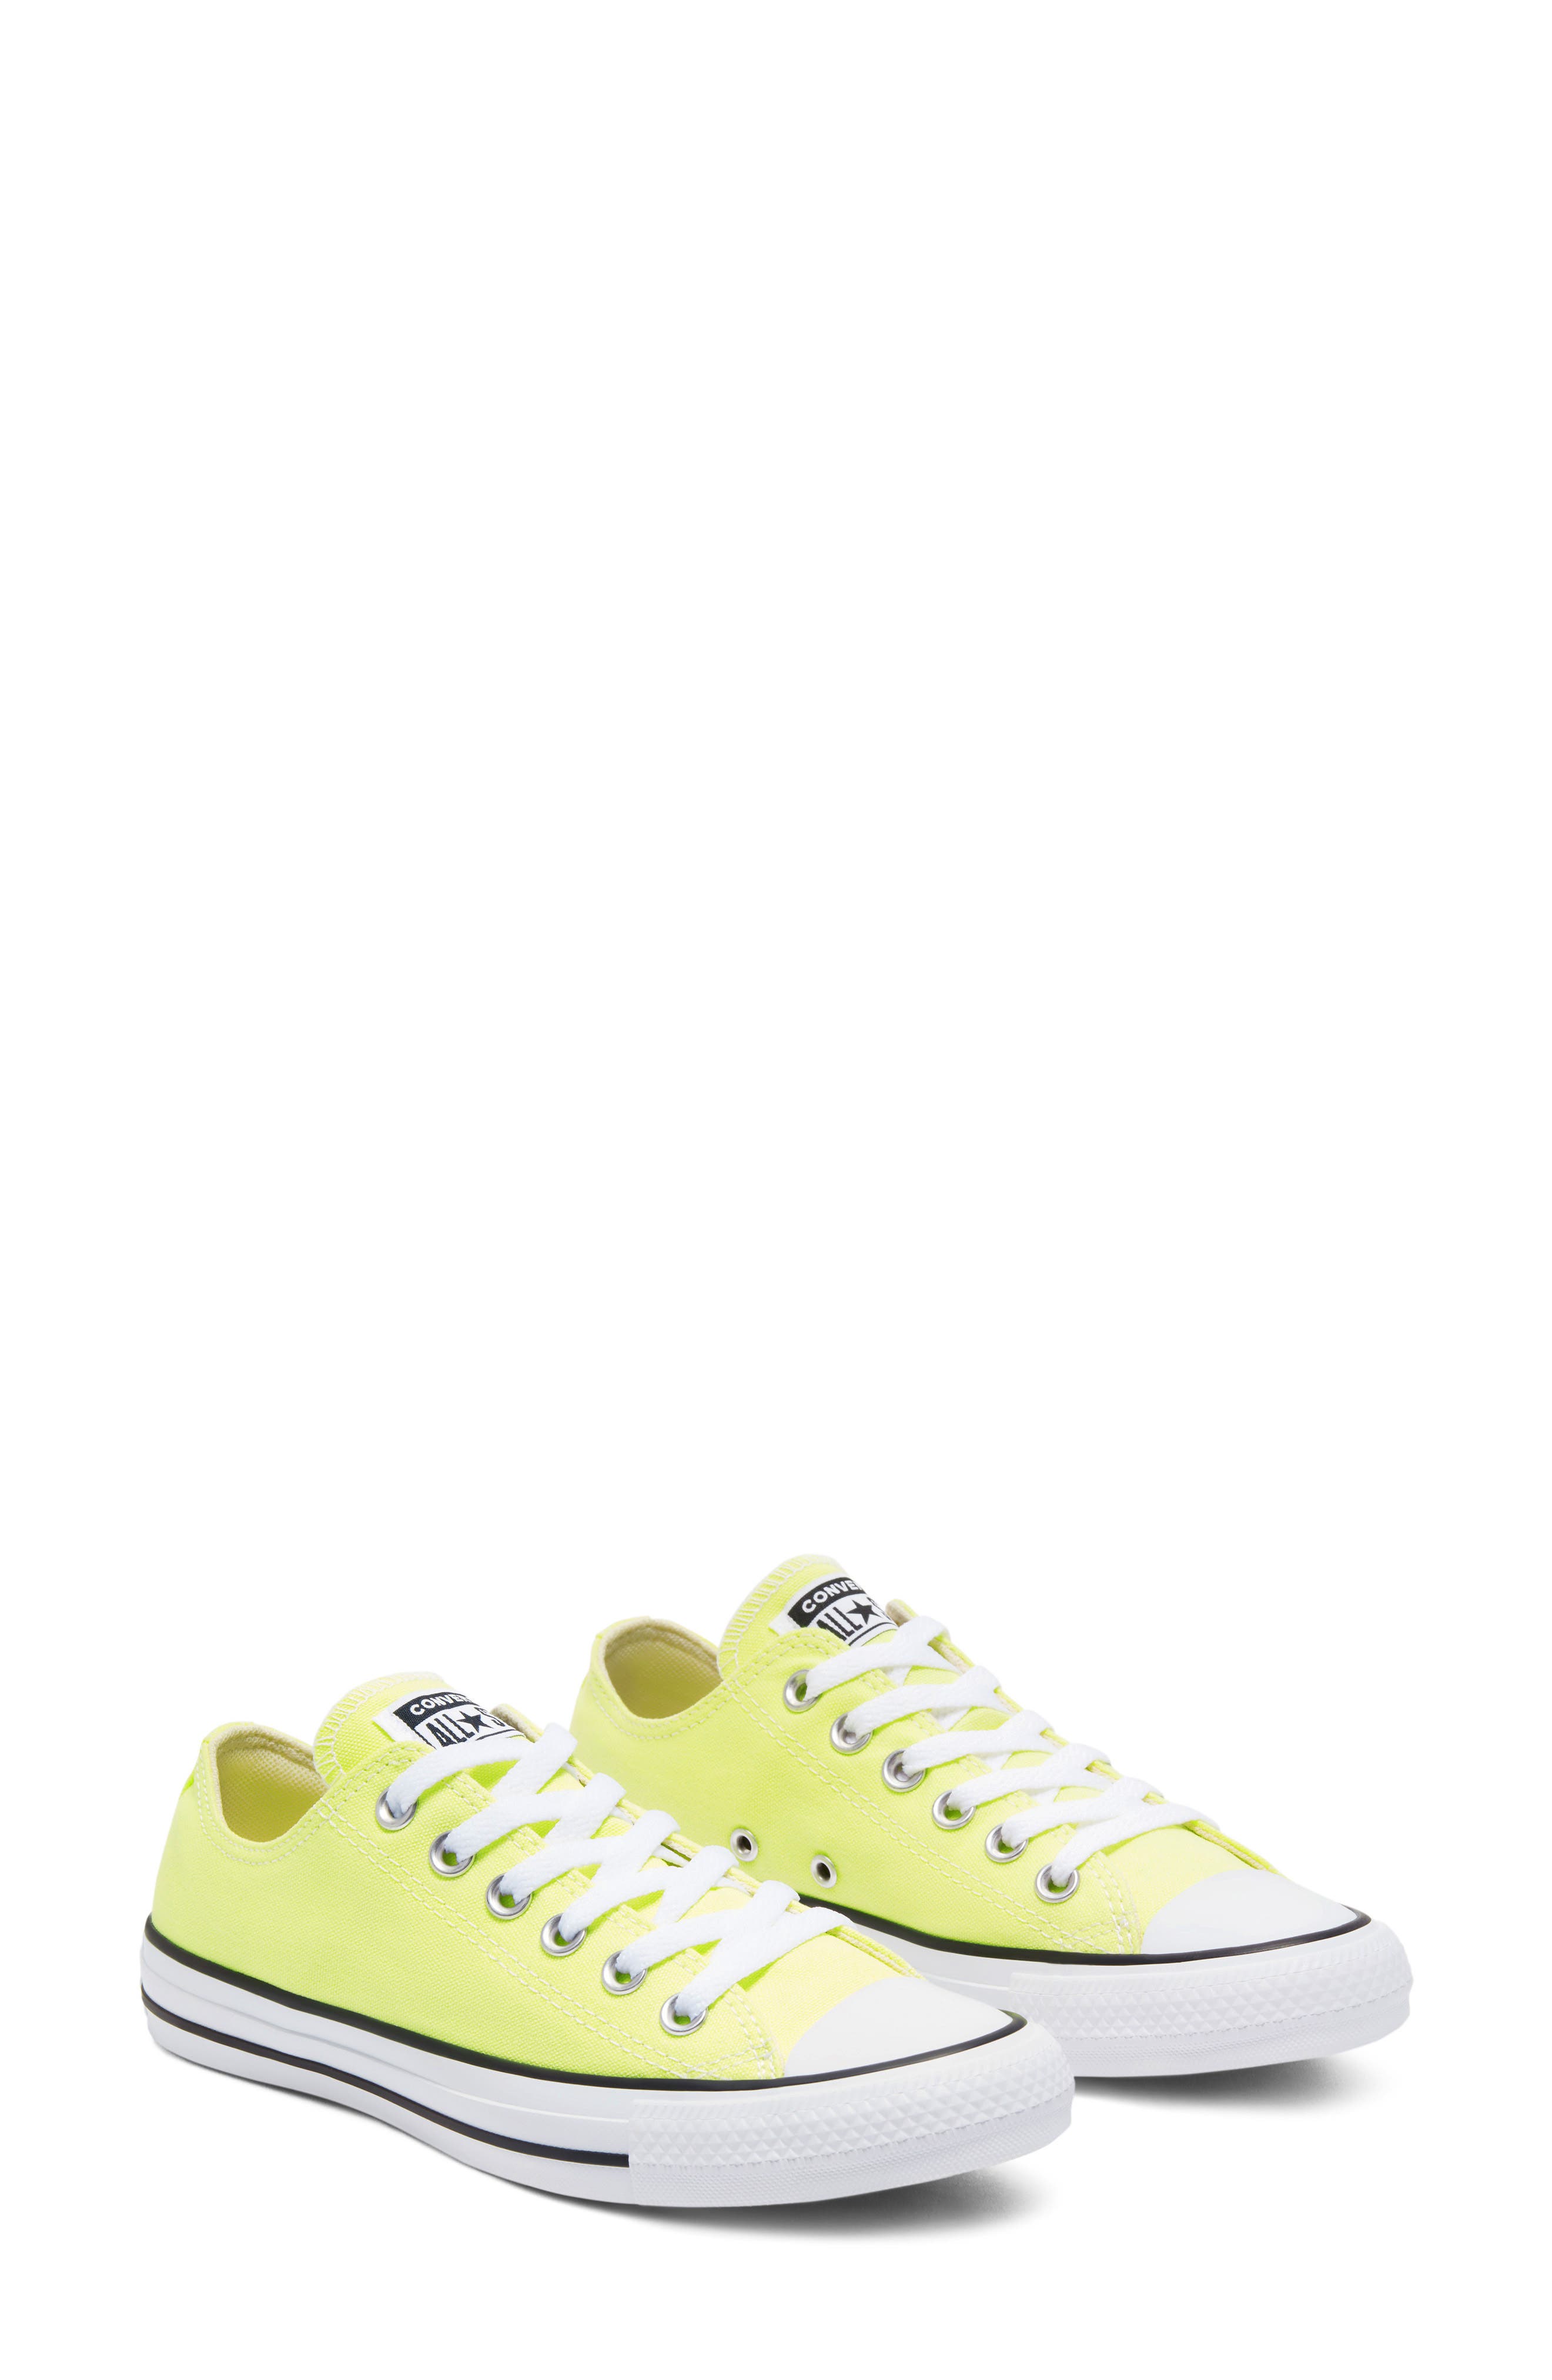 converse shoes yellow womens